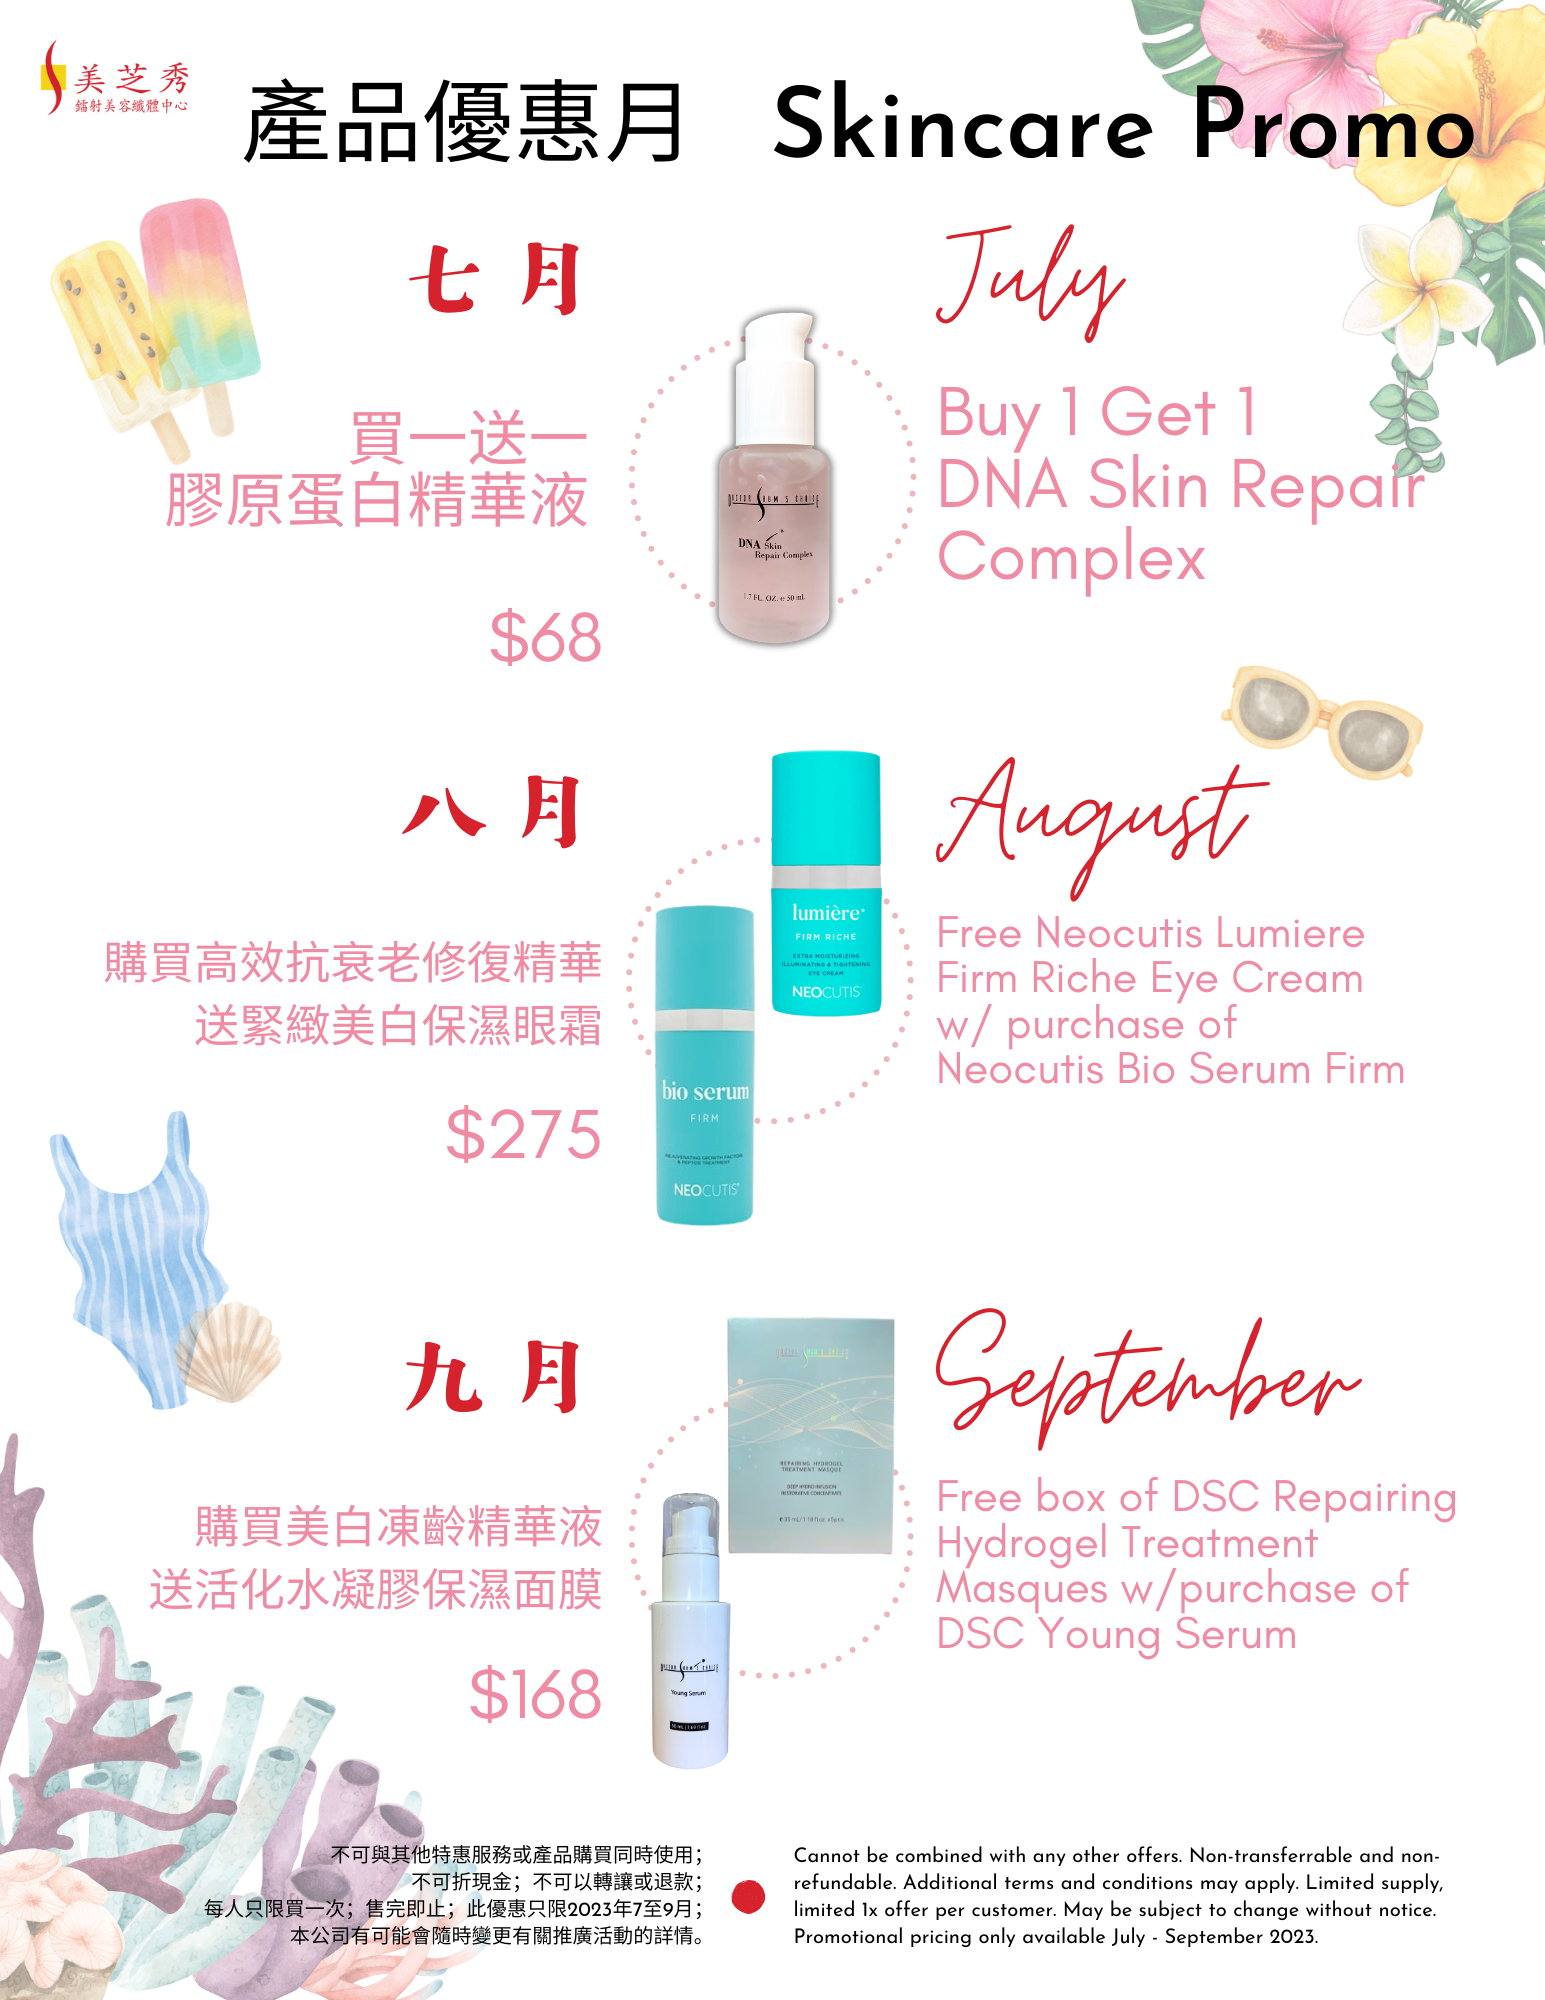 DSC 3rd Quarter 2023 BOGO and special promo skincare products flyer with July's product as DNA Skin Repair Complex, August's product is the Neocutis eye cream with purchase of Neocutis Bio Serum Firm, and September's product is the new DSC Repairing Hydrogel Treatment Masque with purchase of DSC Young Serum and summer watercolor motifs all around